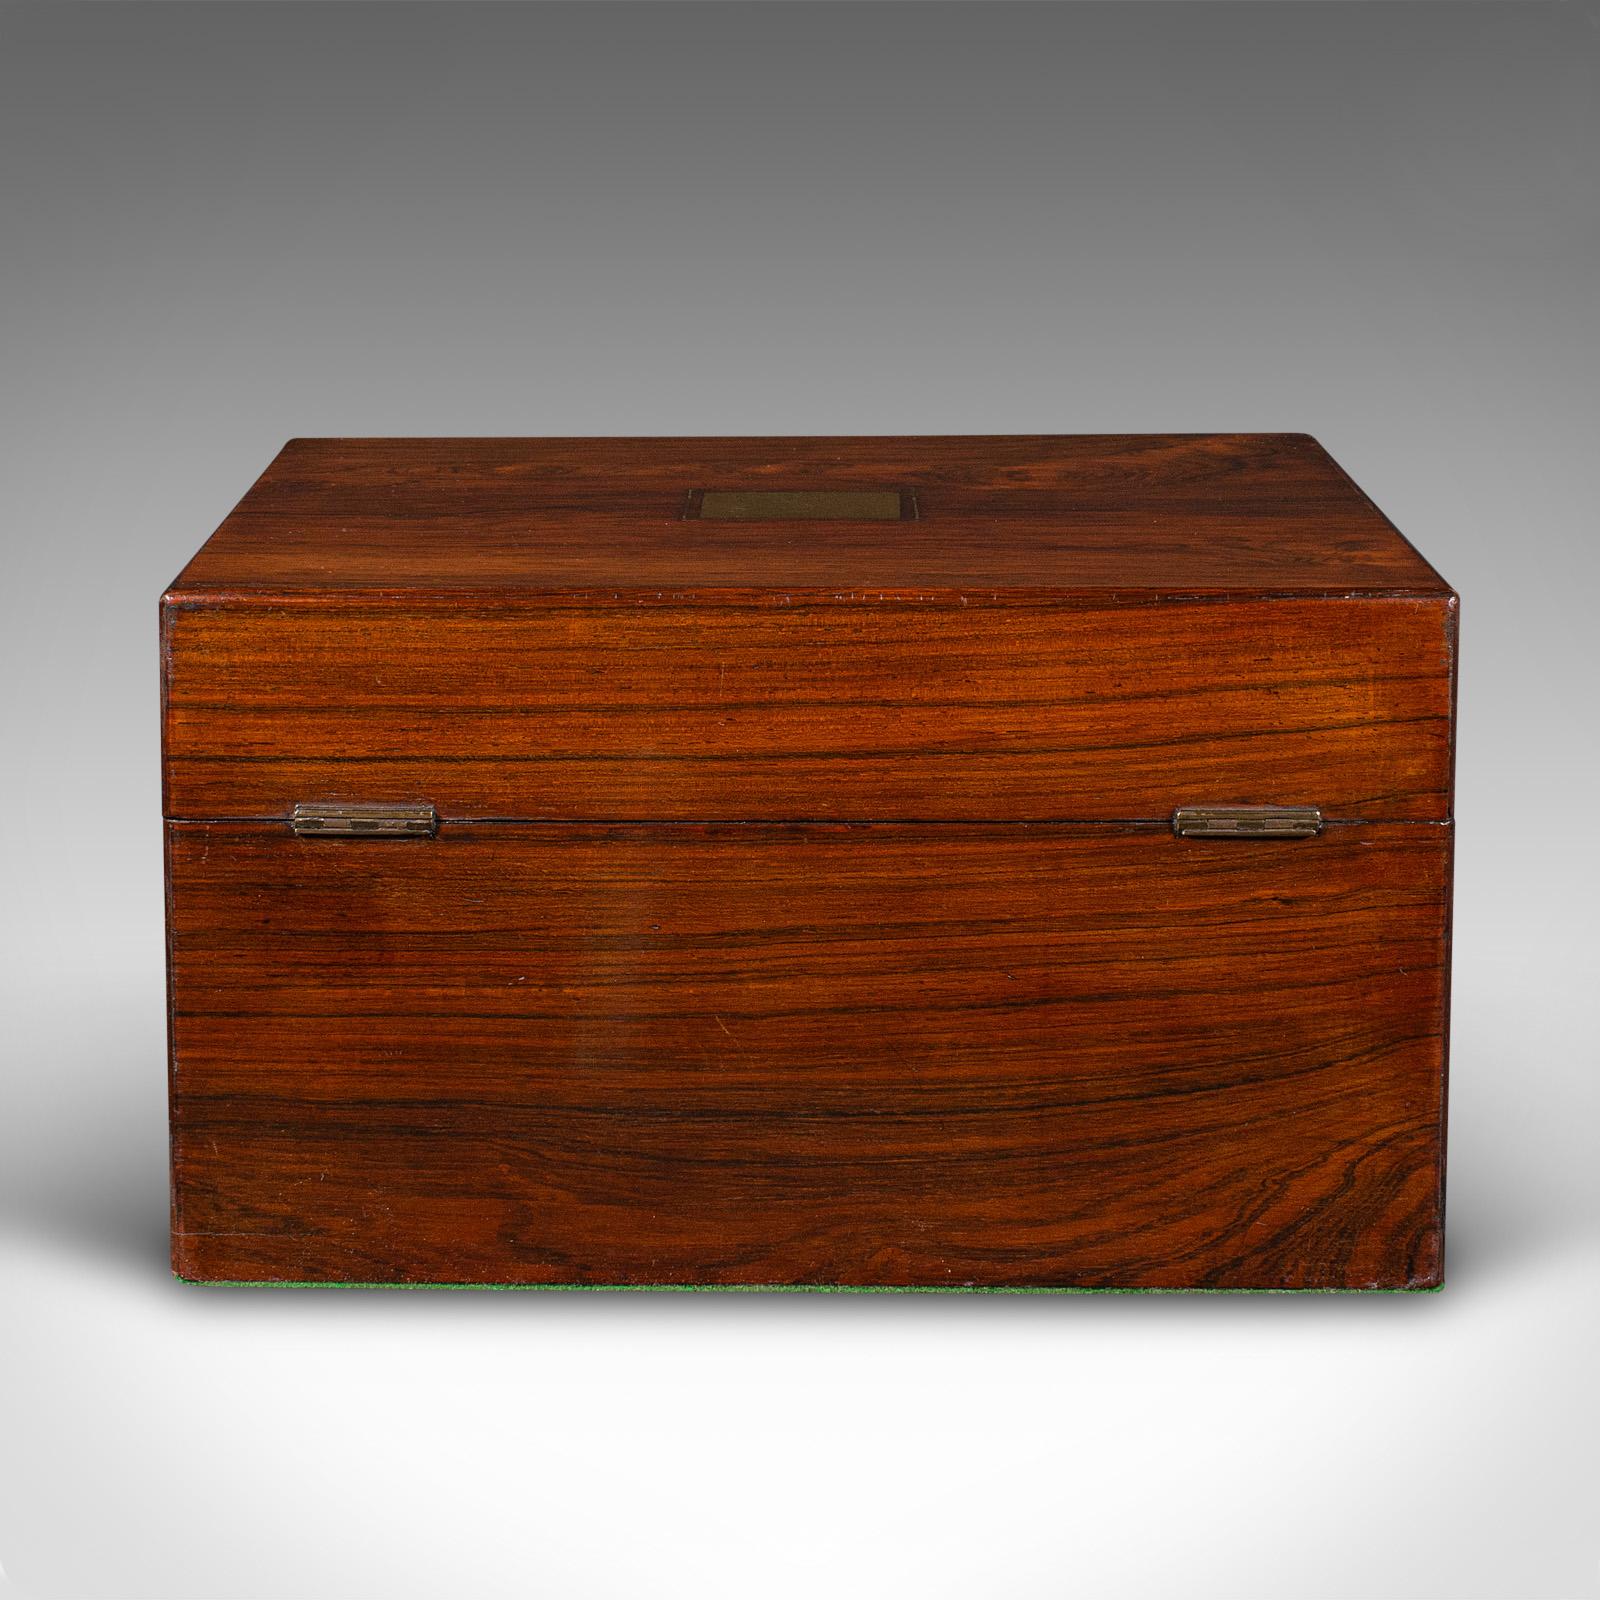 Antique Vanity Case, English, Travelling Dressing Table Box, Regency, Circa 1820 In Good Condition For Sale In Hele, Devon, GB